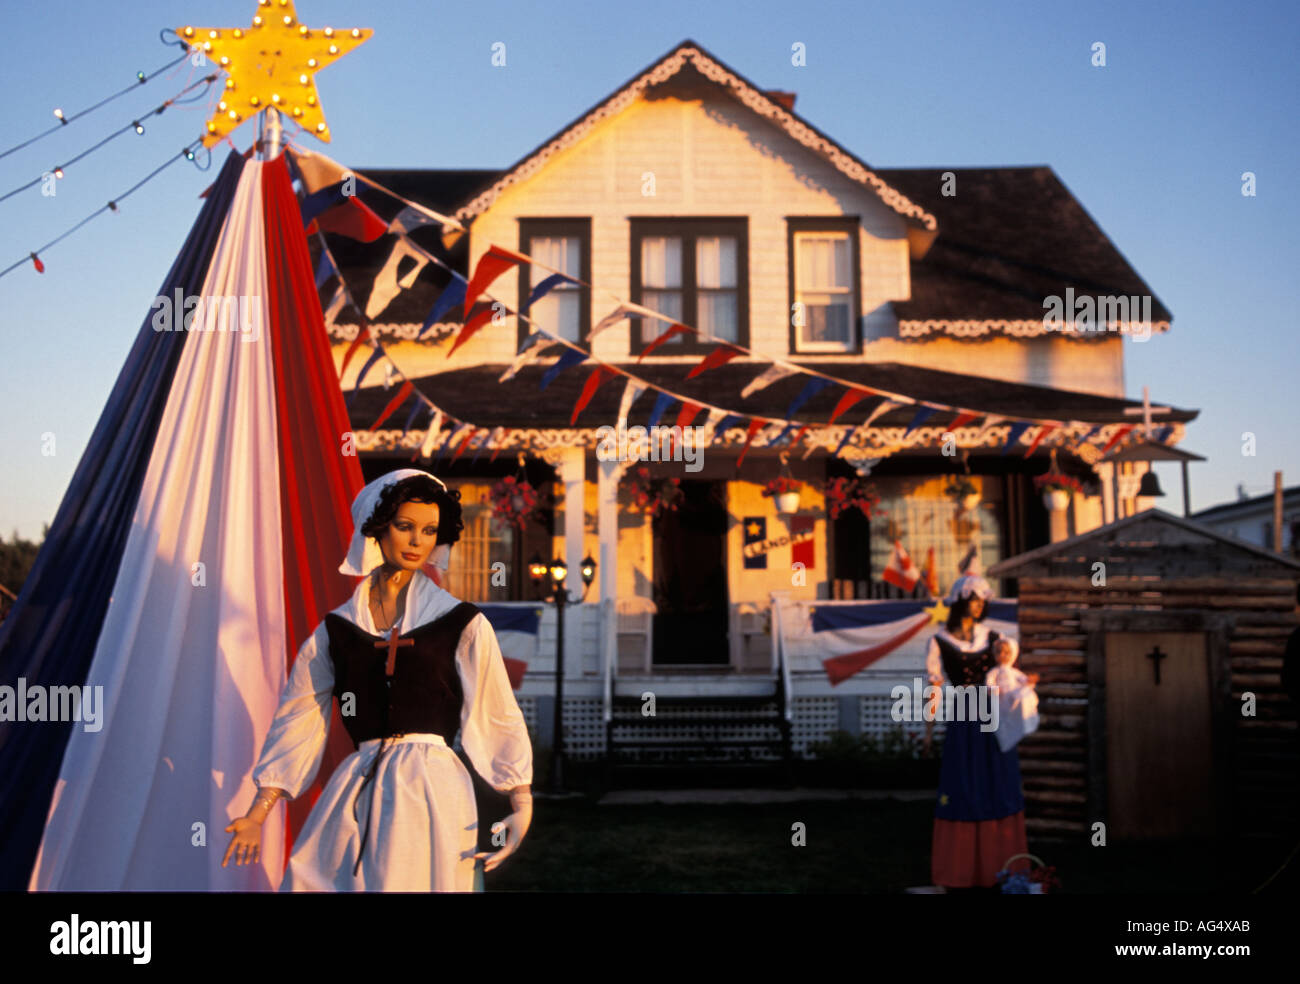 A model made up to look like Evangeline the Henry Wordsworth heroine during the Acadian festival in Caraquet New Brunswick Stock Photo